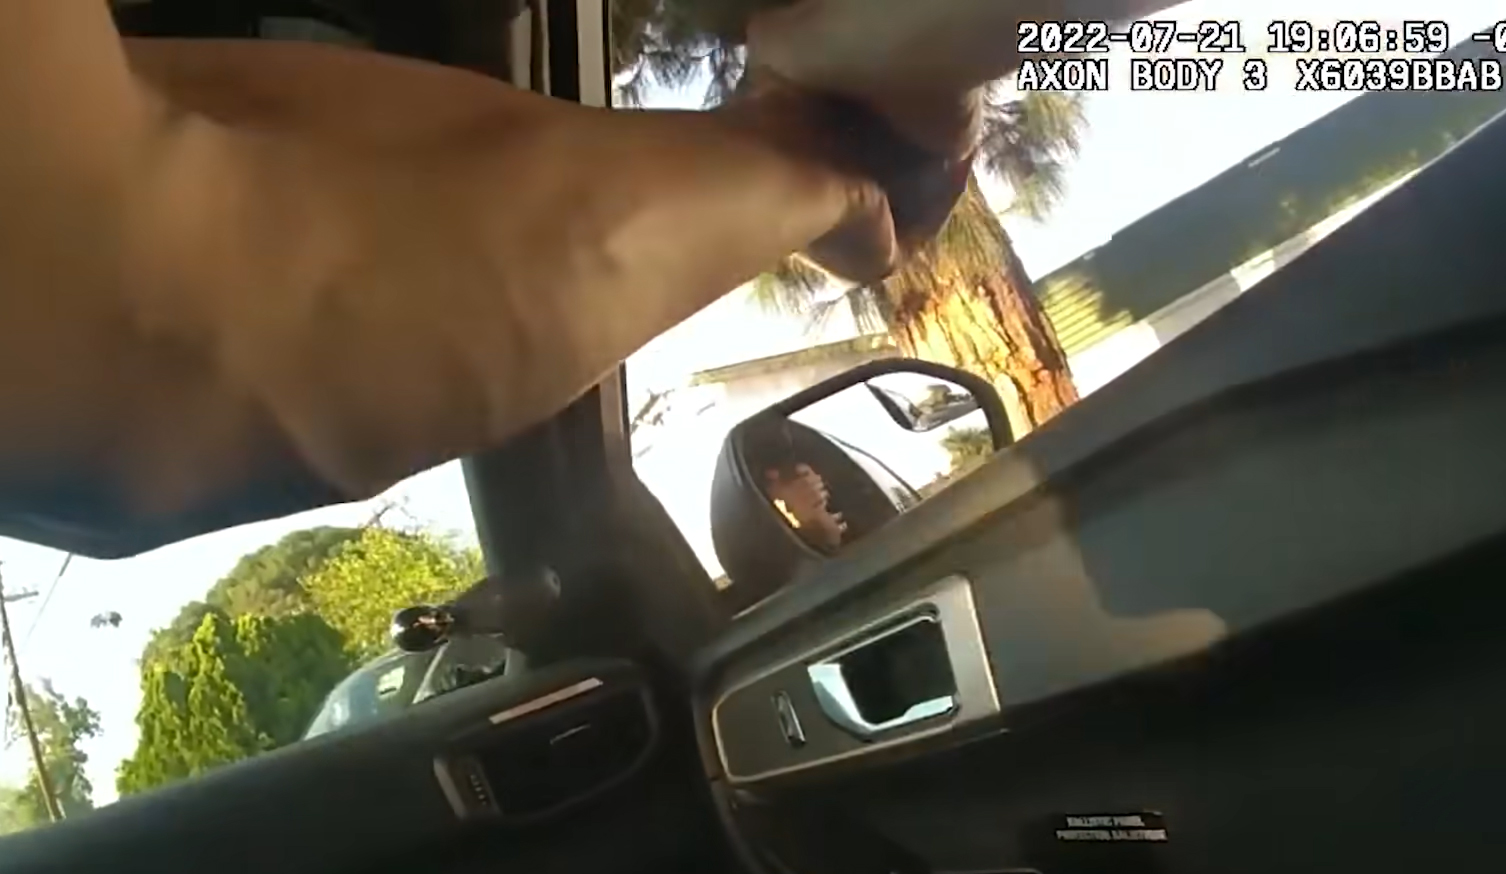 Police body camera video shows an LAPD officer firing his weapon at an unarmed suspect while inside a moving patrol vehicle. (Source: Screenshot - YouTube)